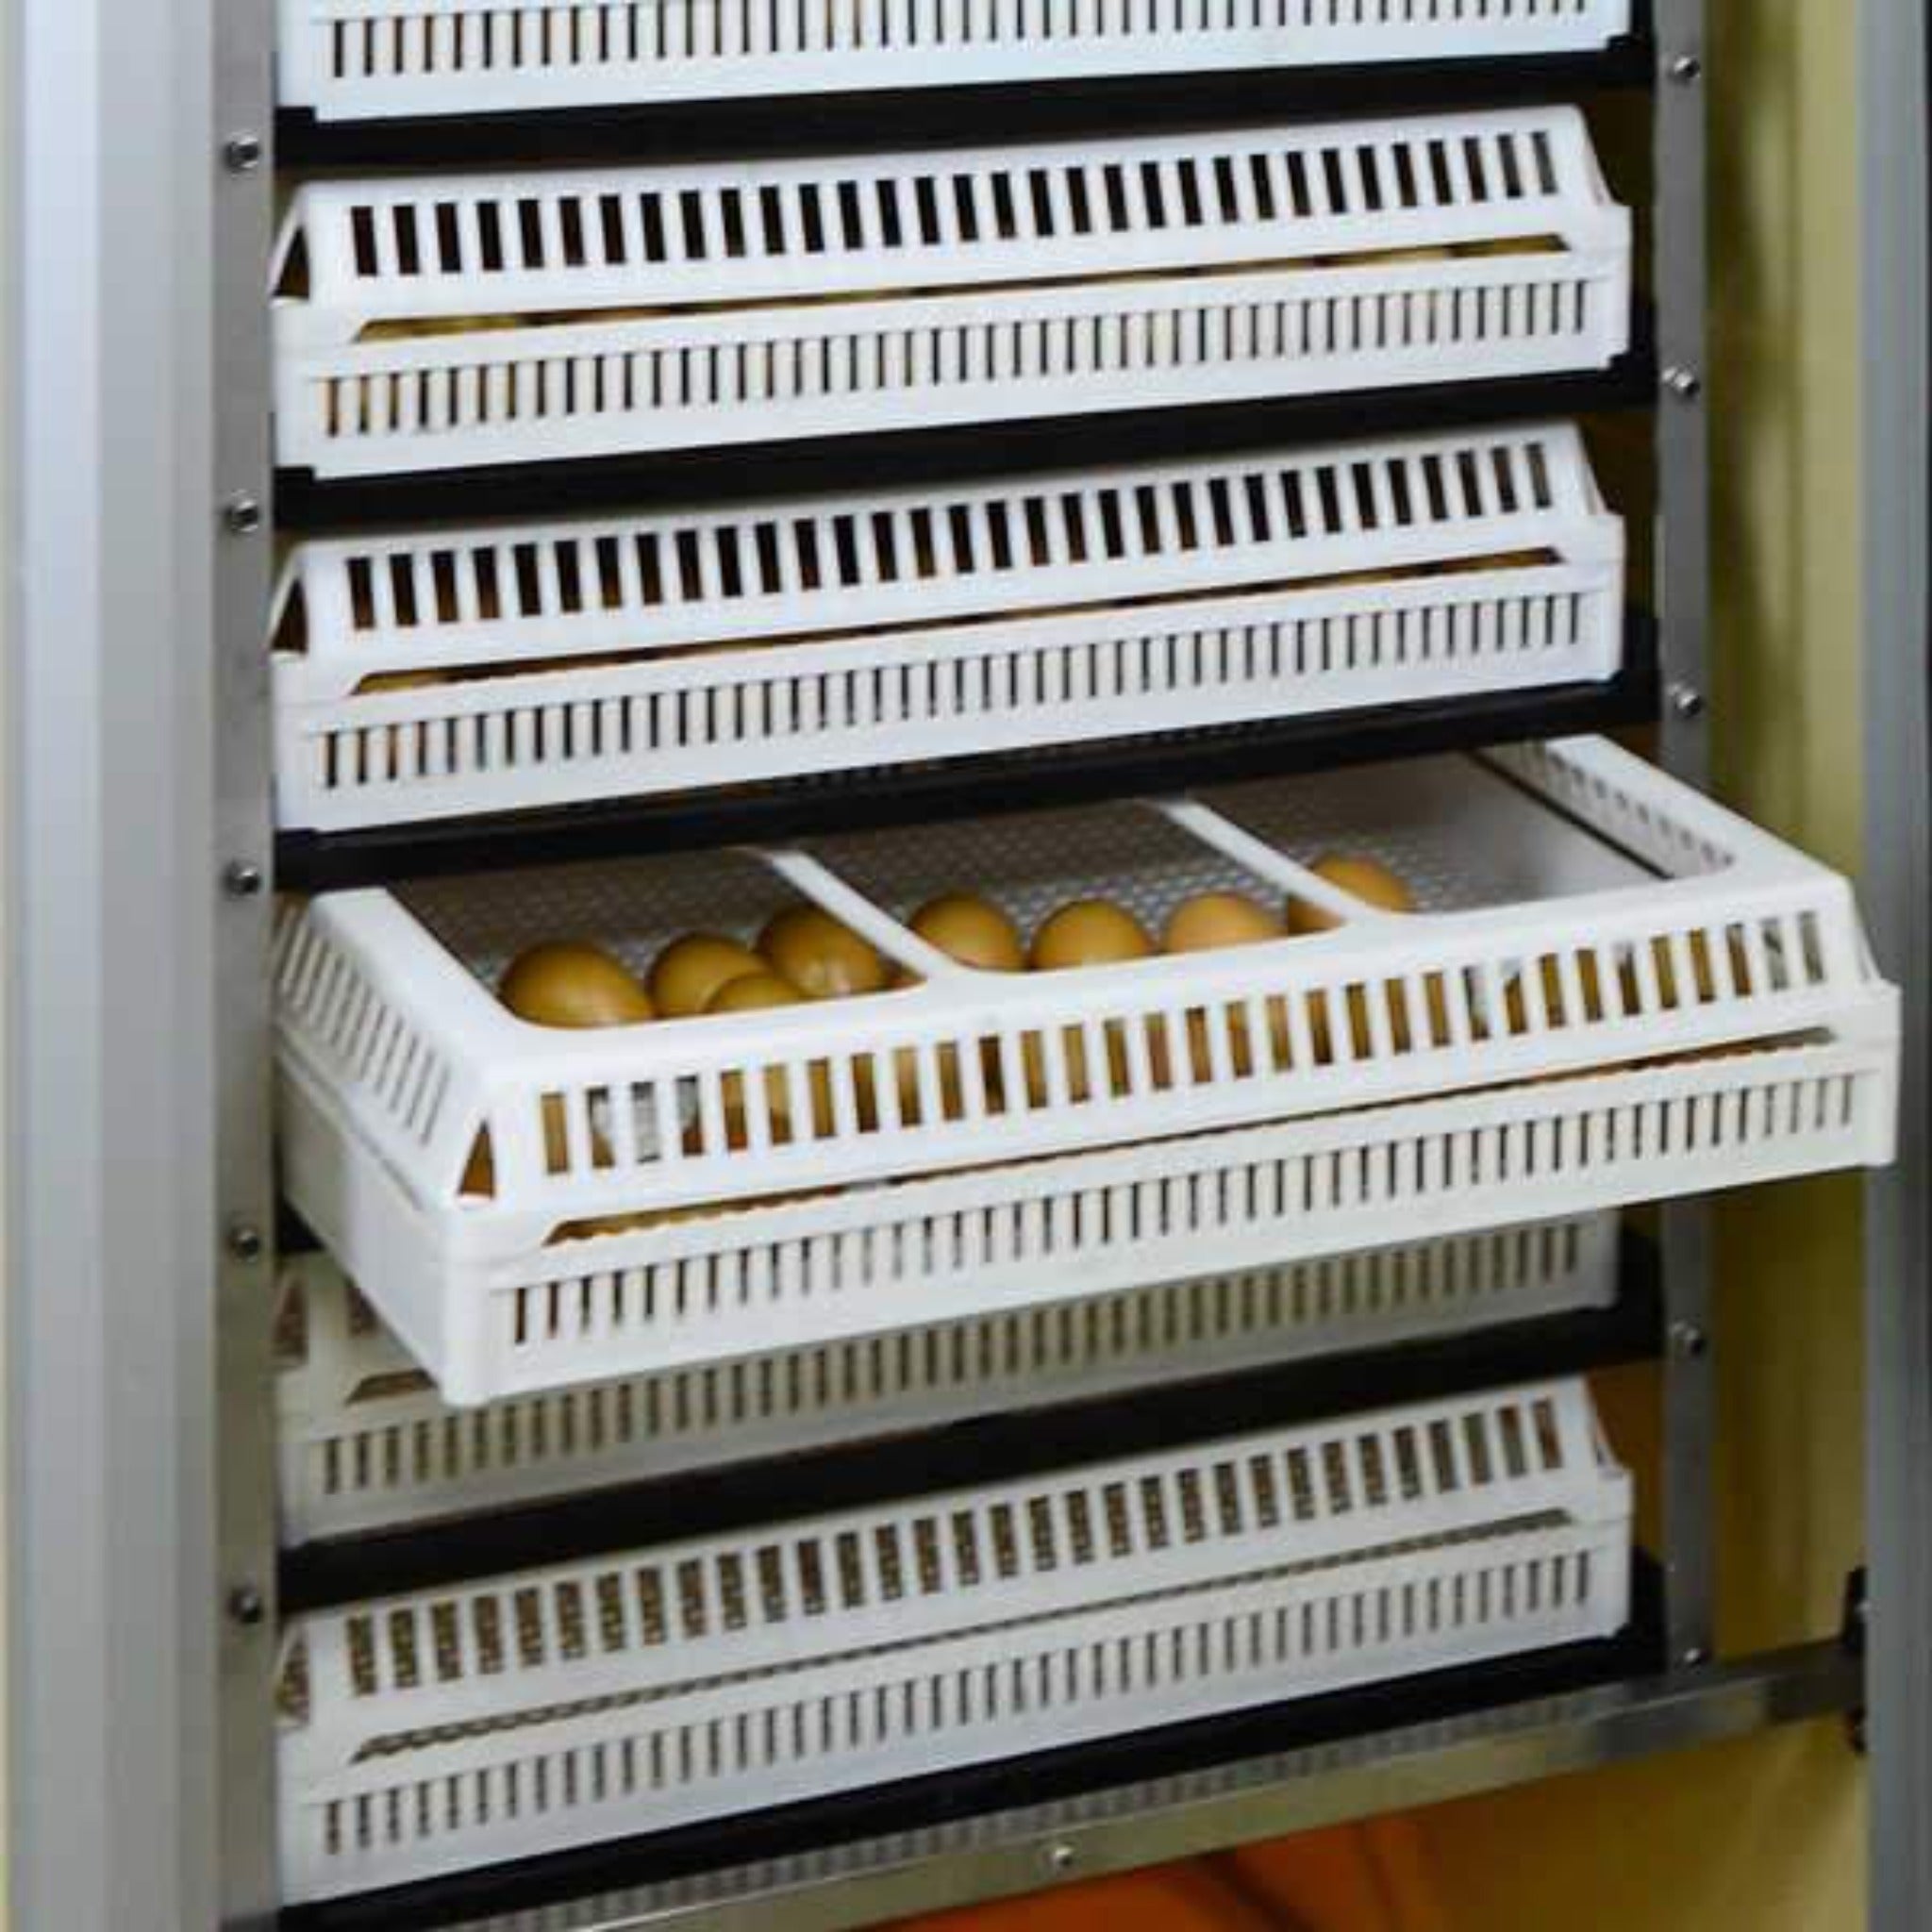 Hatching Time CImuka. Egg basket can be seen halfway out of incubator rack. Hatching basket has brown chicken eggs inside, visible through lid.